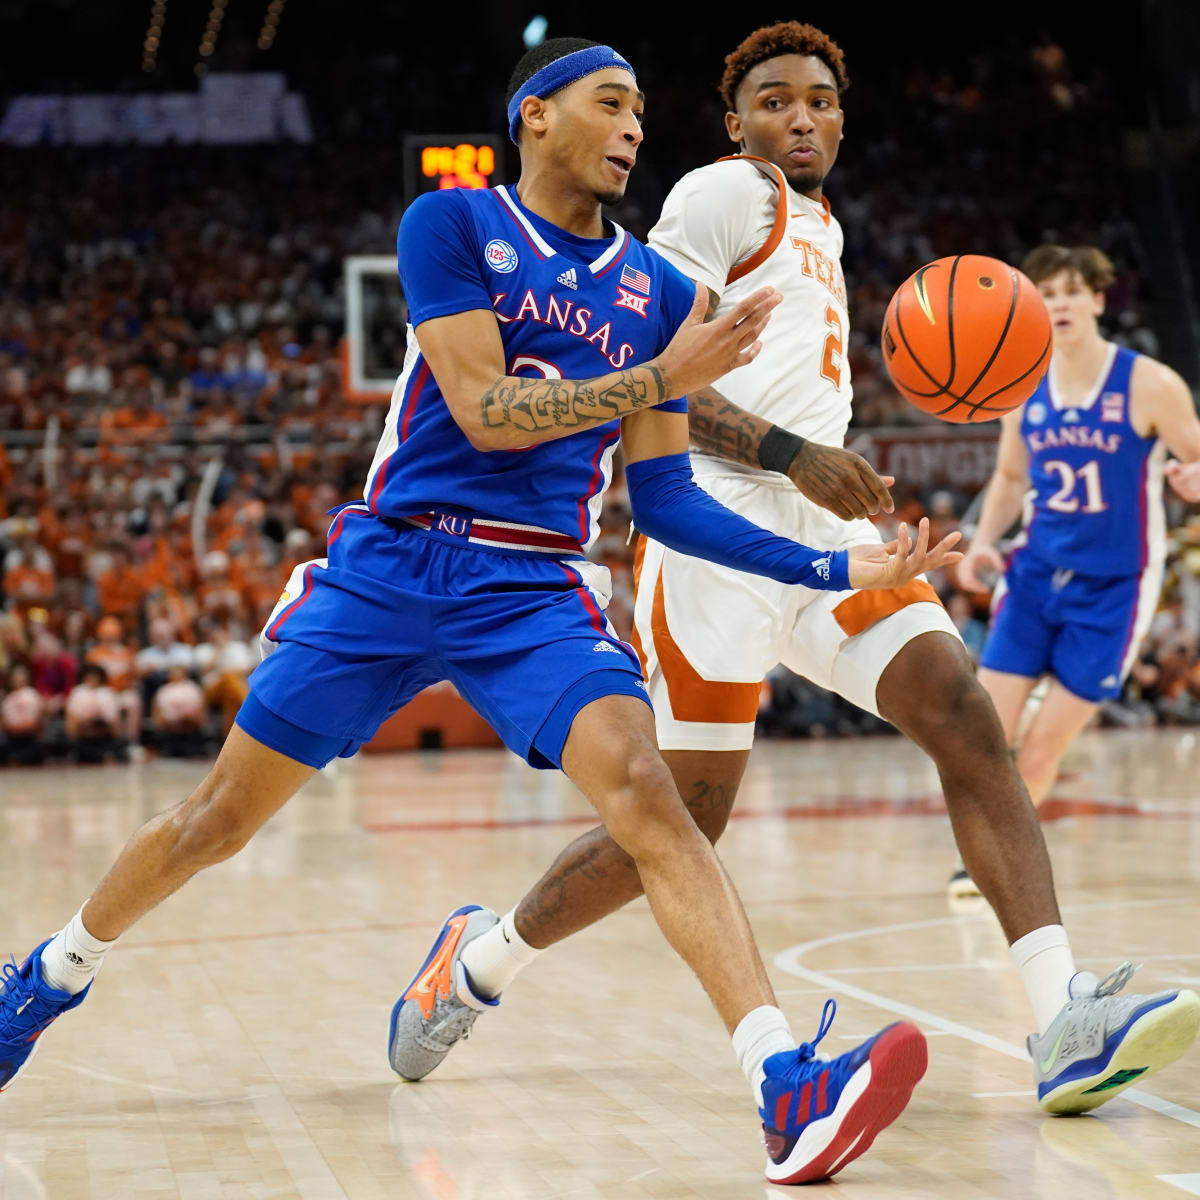 Game Primer How To Watch, Things To Know for Texas vs Kansas